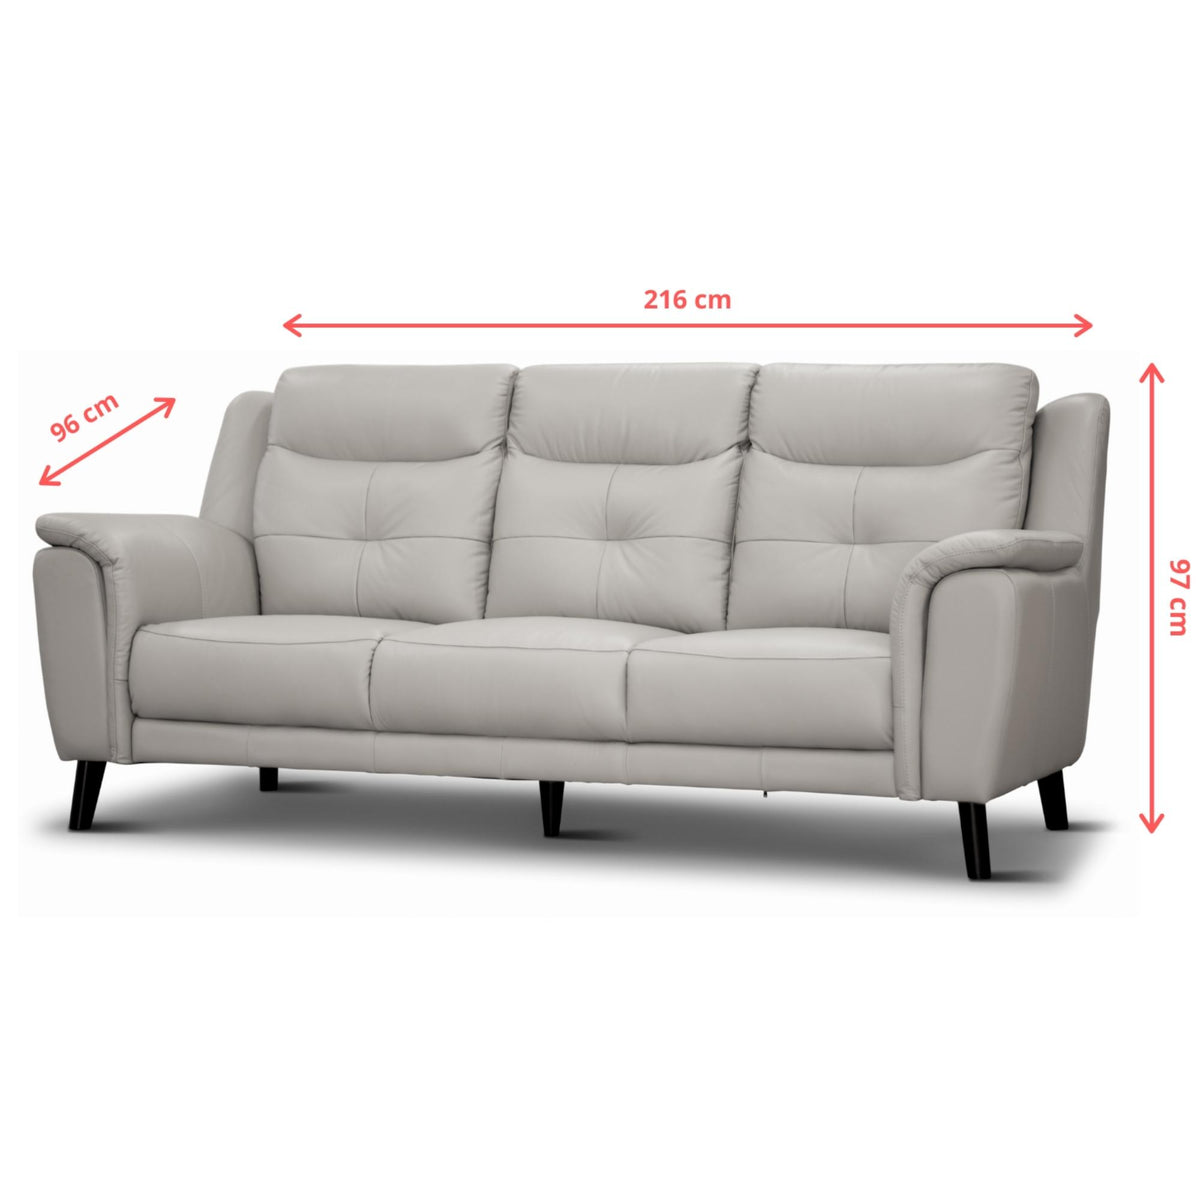 Opal 2+3 Seater Leather Sofa Silver 